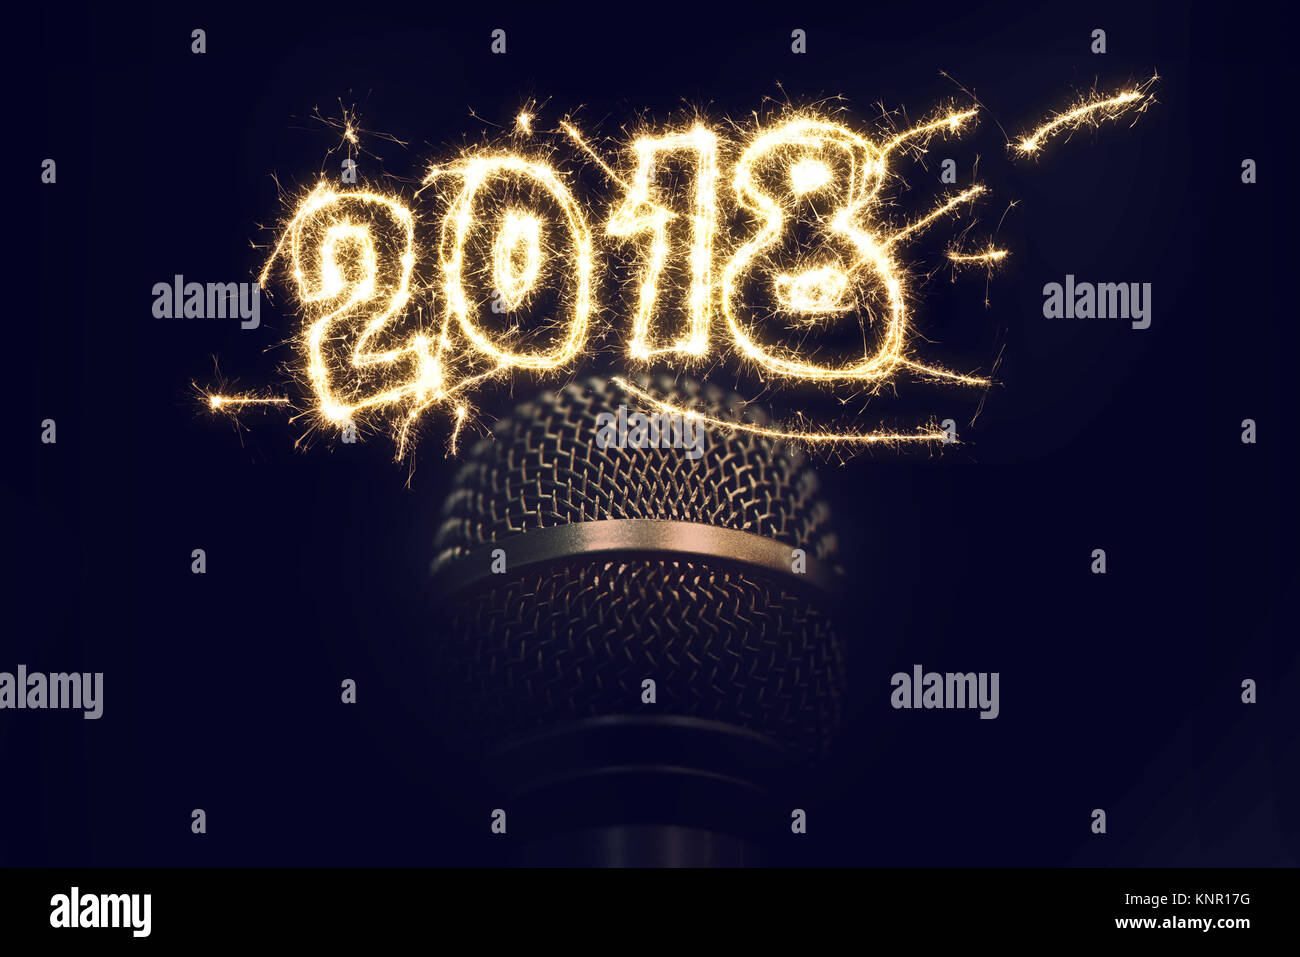 Singing on 2018 New Years Eve, karaoke audio microphone on dark background with sparkles Stock Photo